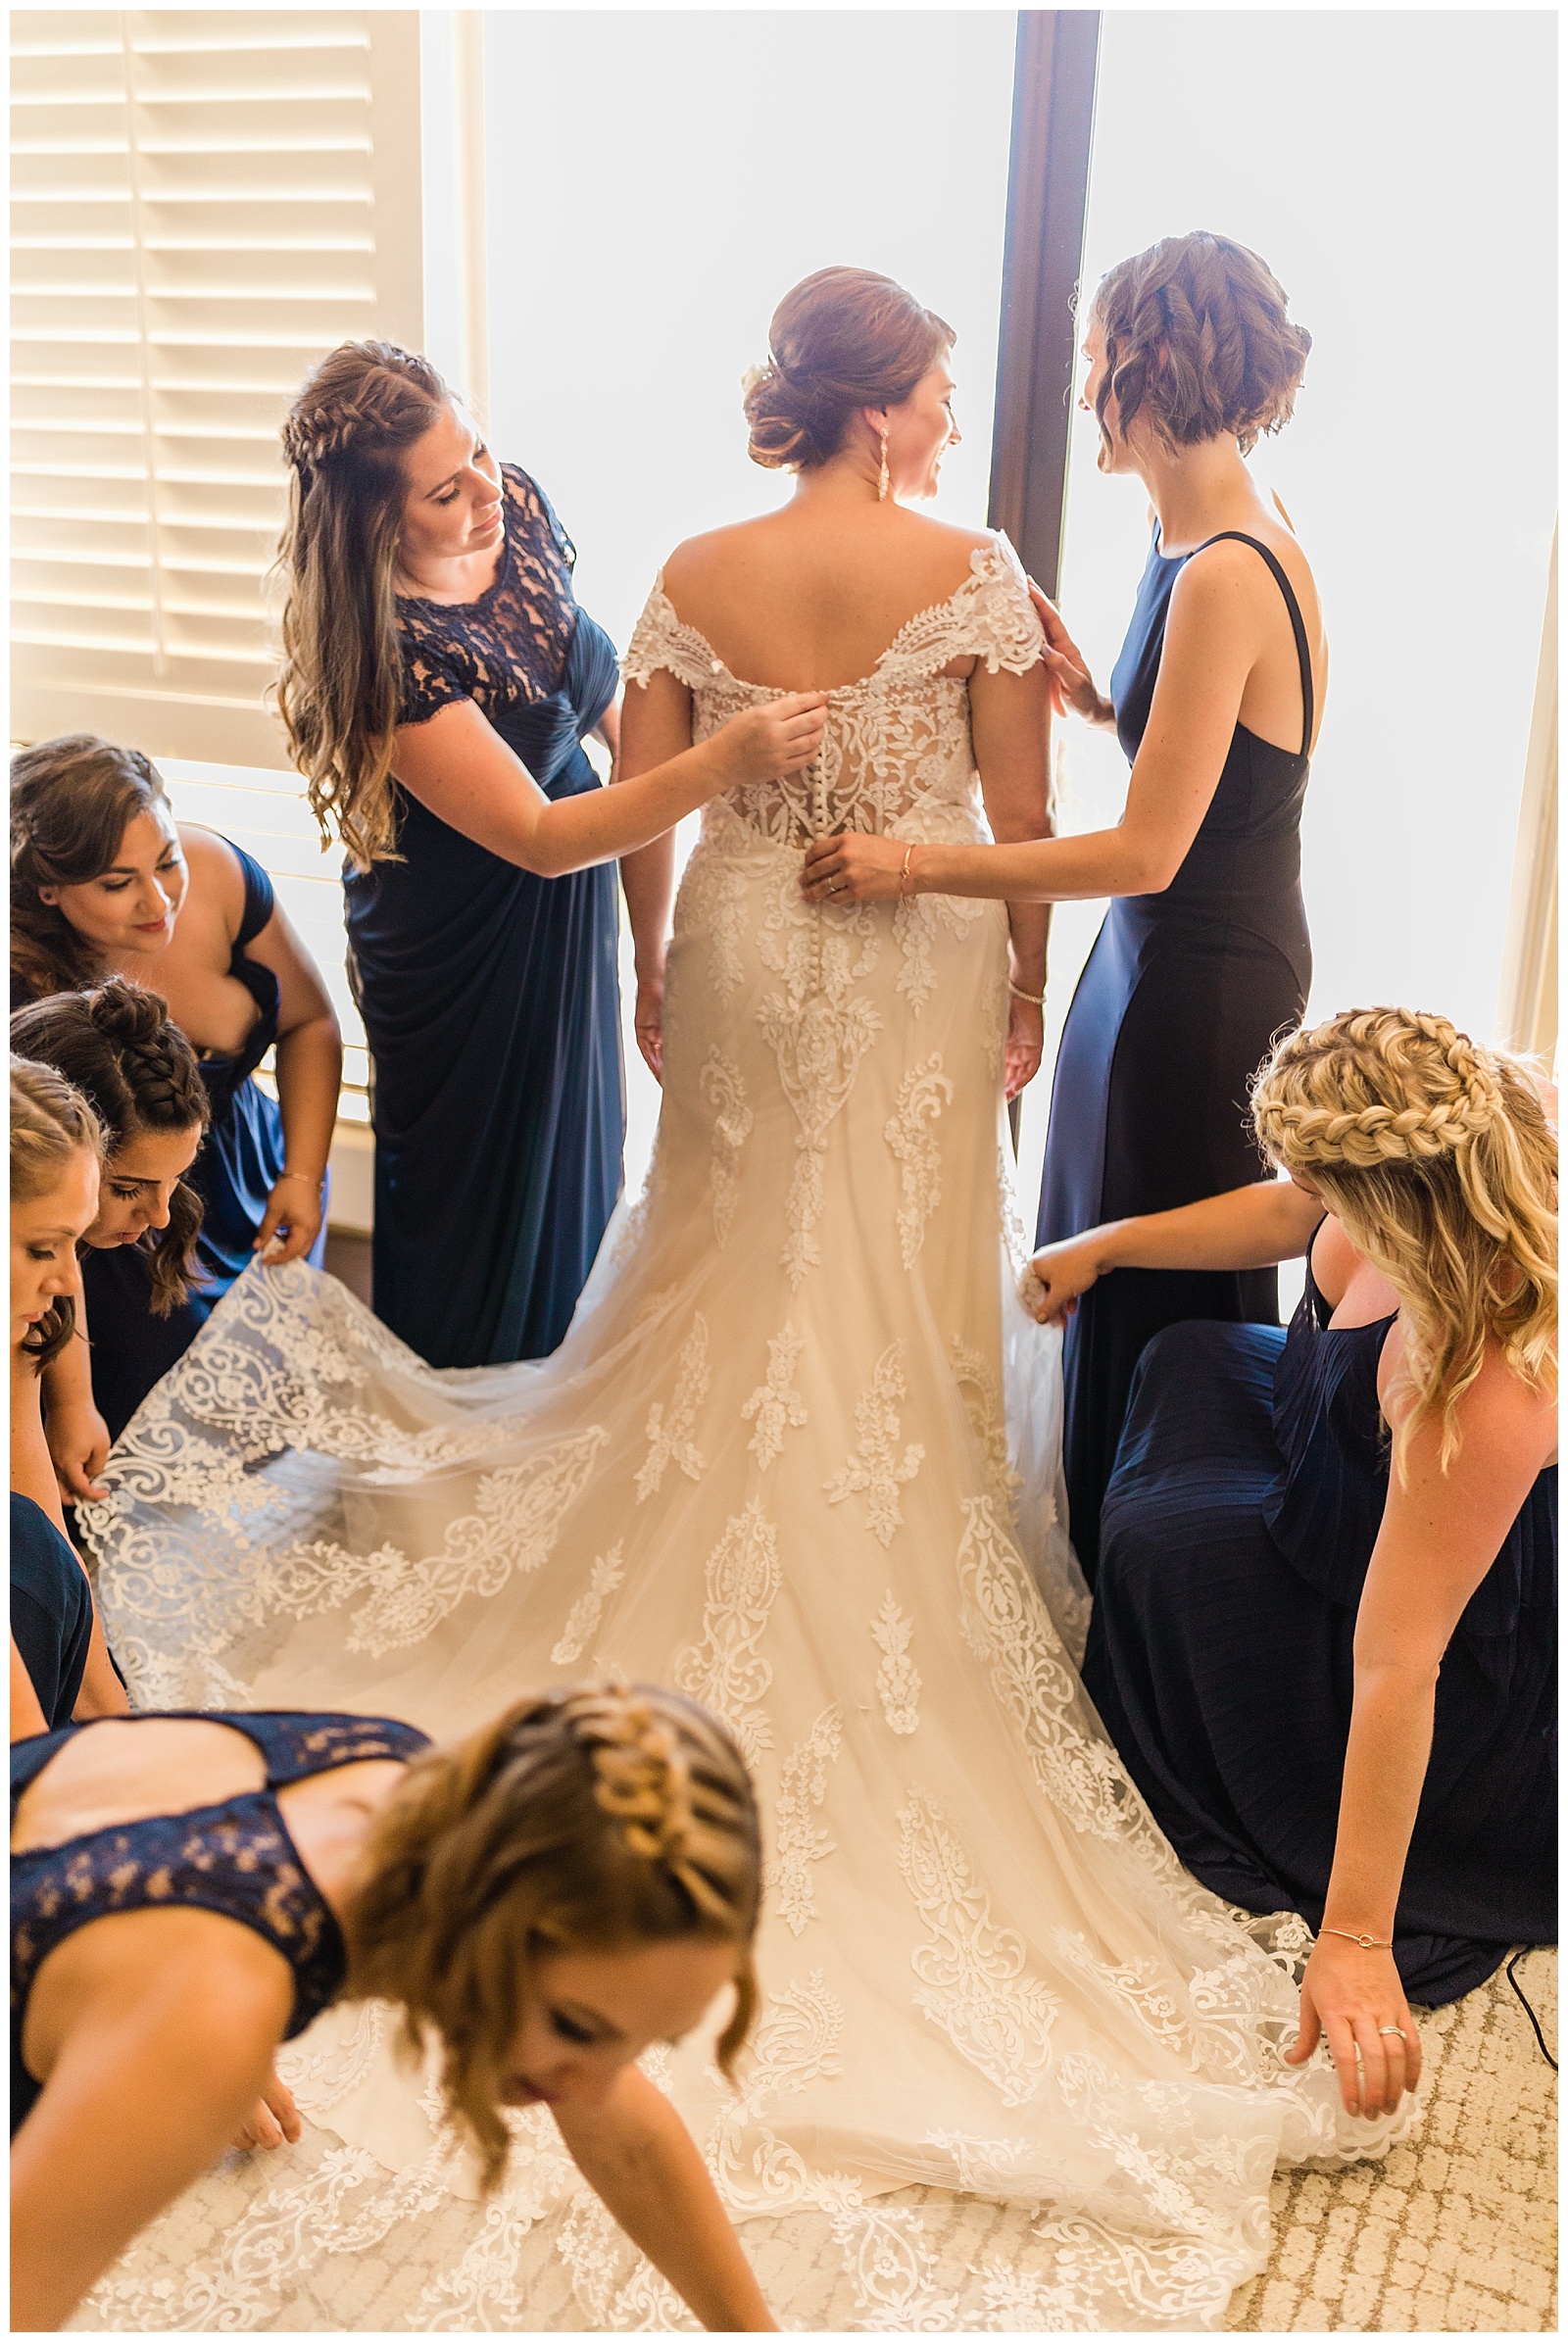 bridesmaids helping the bride with her wedding dress